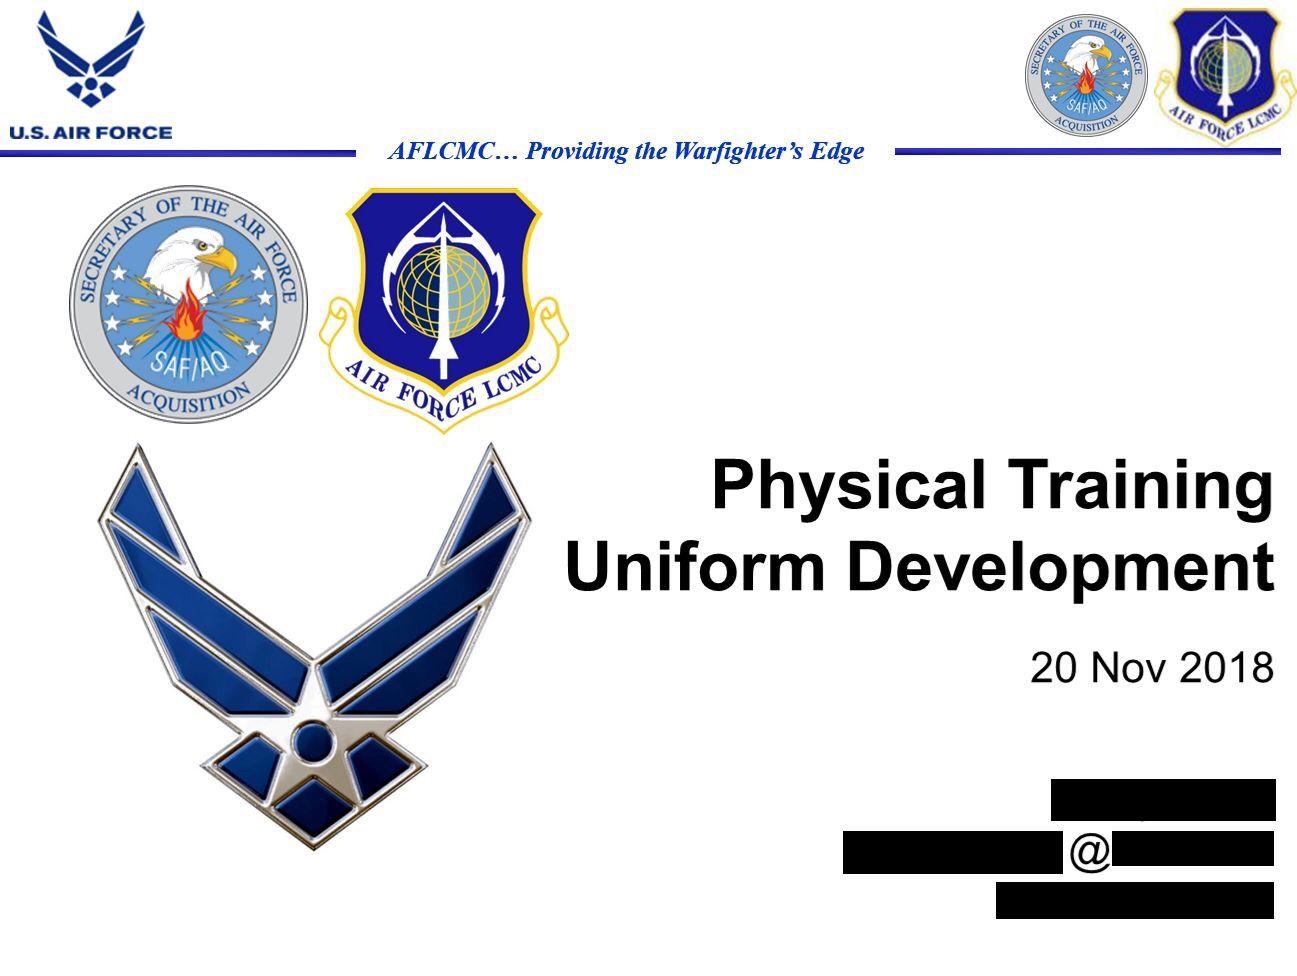 AFLCMC Logo - A New PT Uniform For The US Air Force? - Soldier Systems Daily